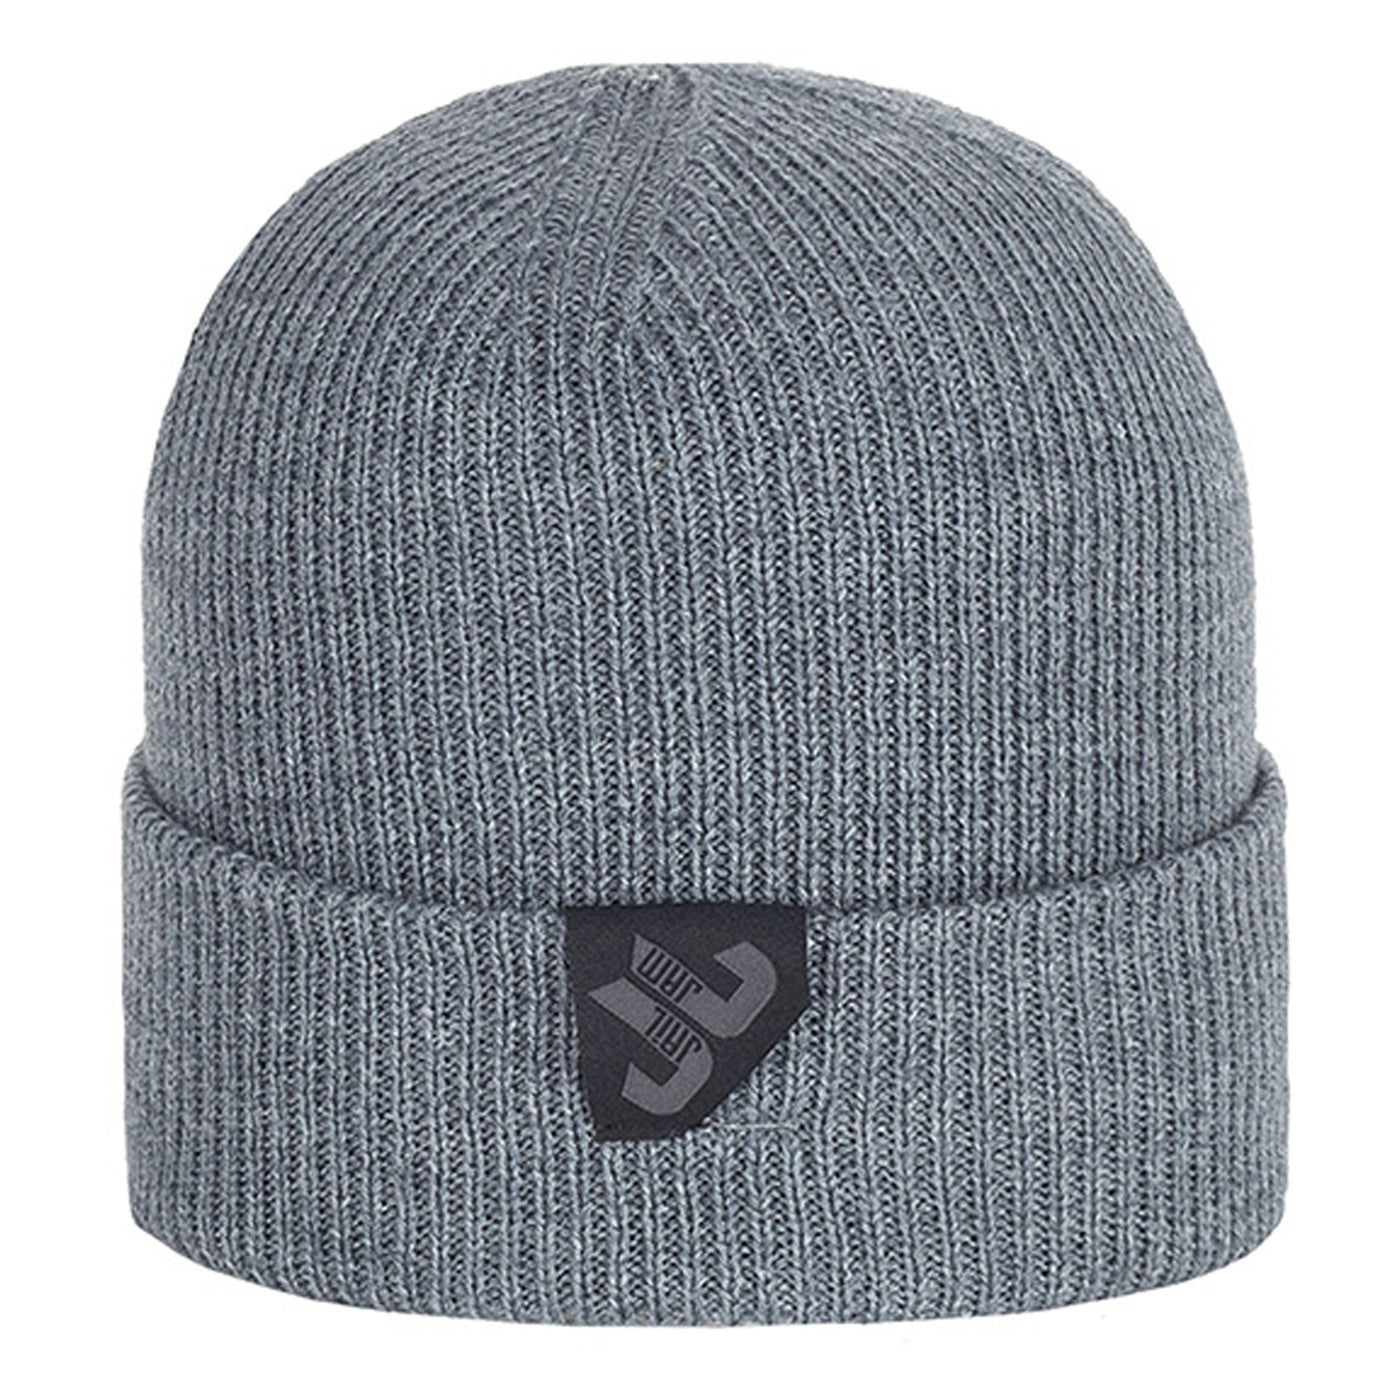 JailJam Atomium Beanie - only Med Grey available